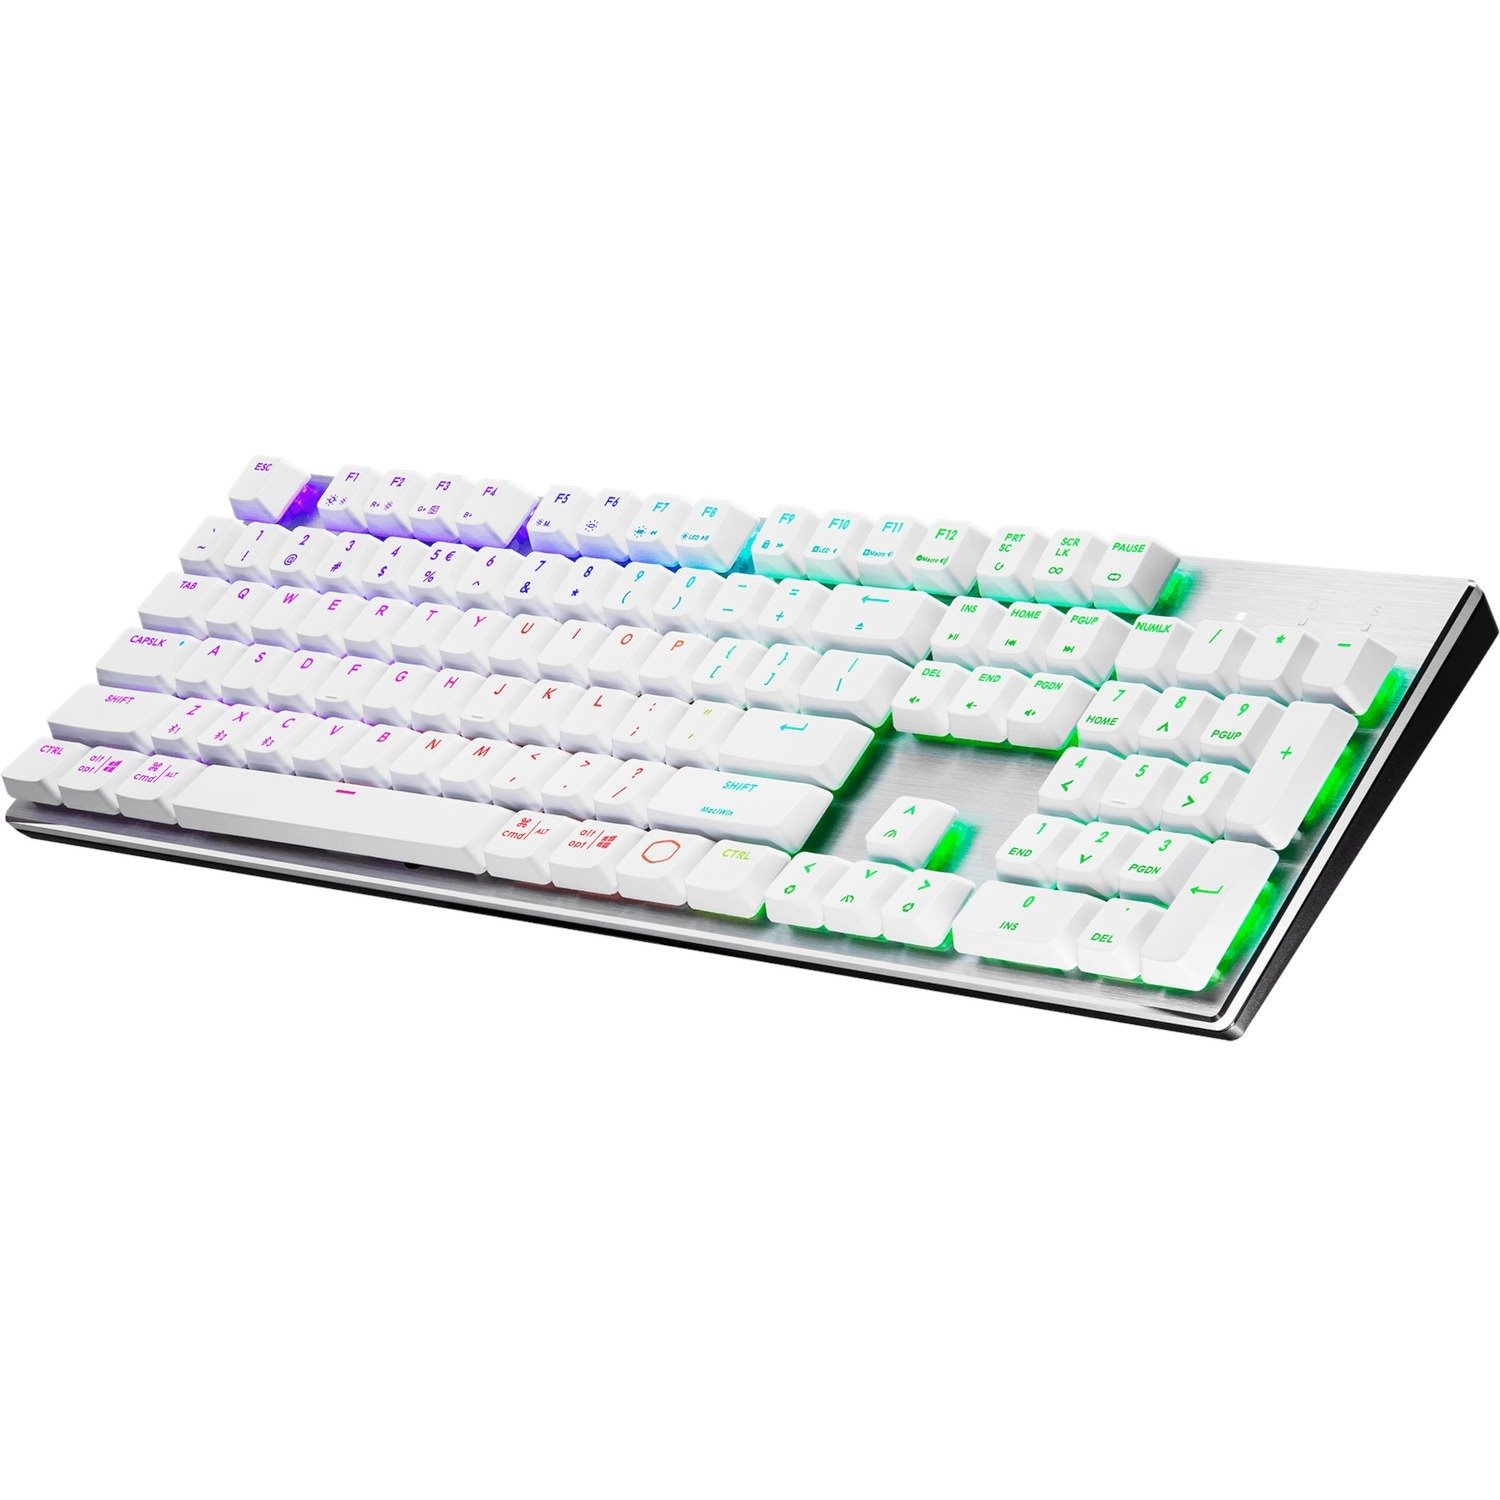 Cooler Master SK653 Gaming Keyboard - Wired/Wireless Connectivity - USB 2.0 Type A Interface - RGB LED - English (US) - Silver/White